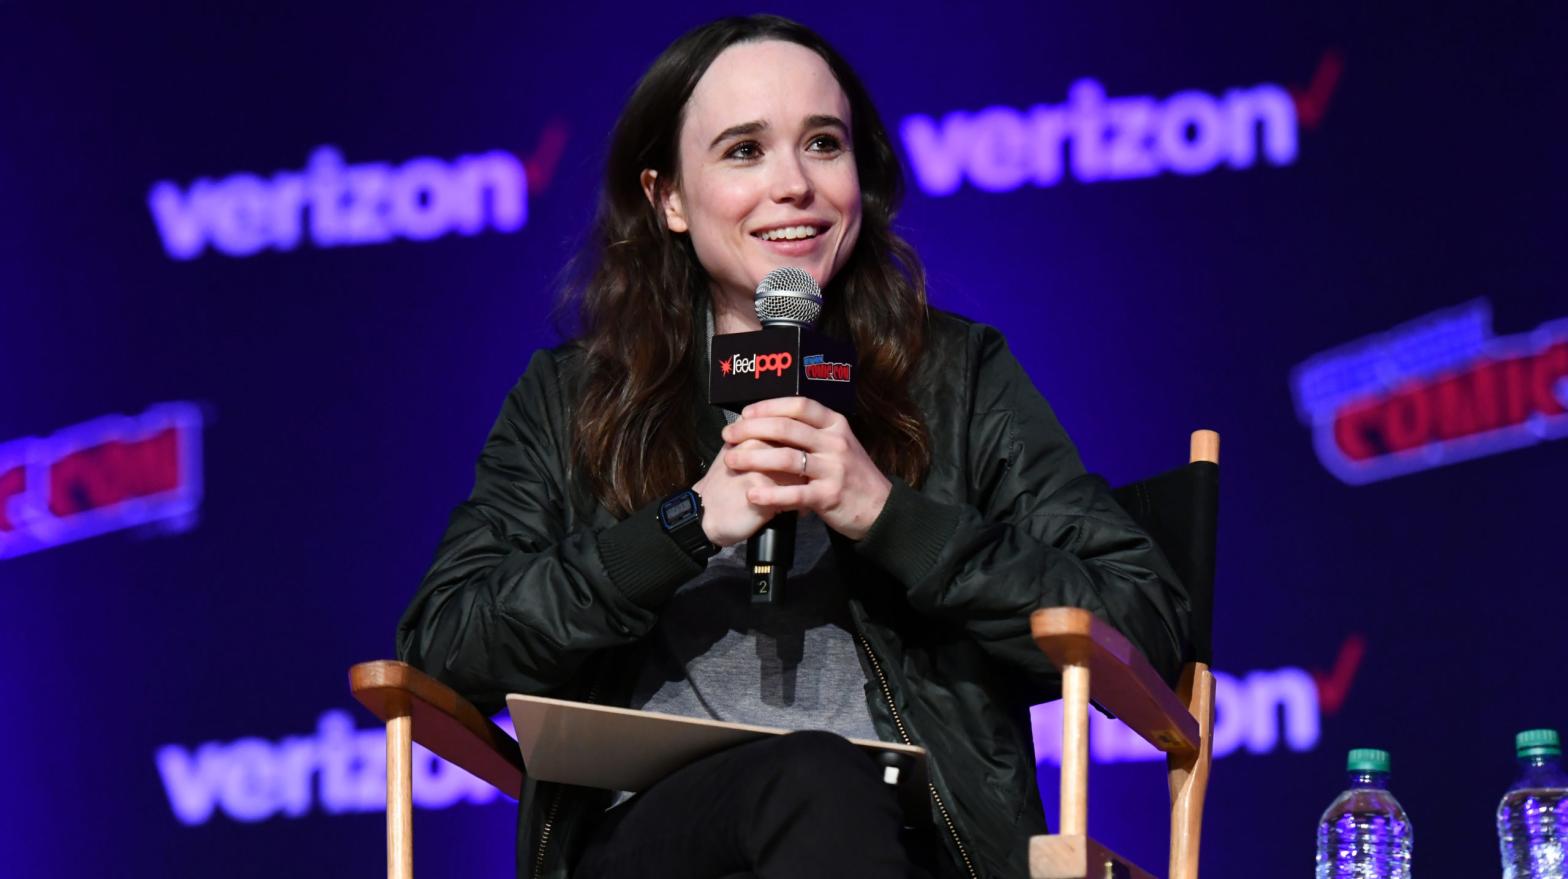 Elliot Page speaking at New York Comic Con in 2018. (Photo: Noam Galai/Getty, Getty Images)